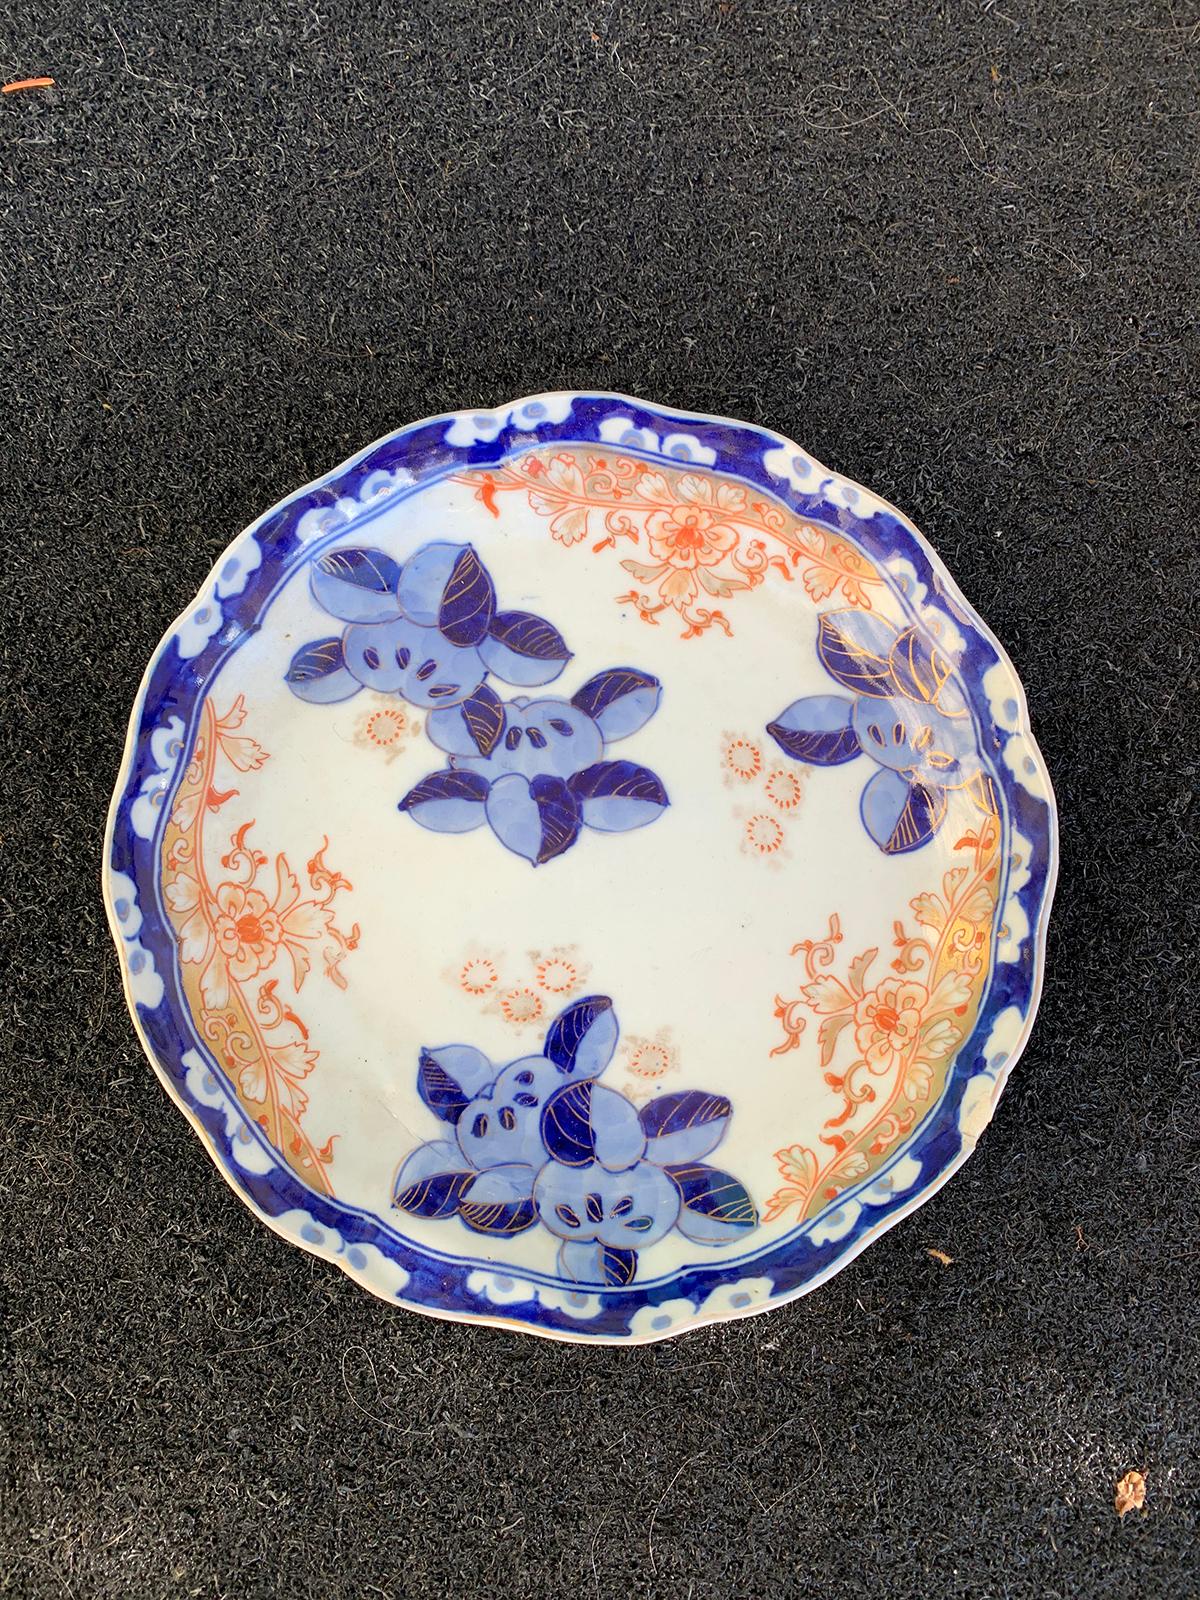 19th century Imari style orange and blue porcelain plate with gilt details, scalloped edge.